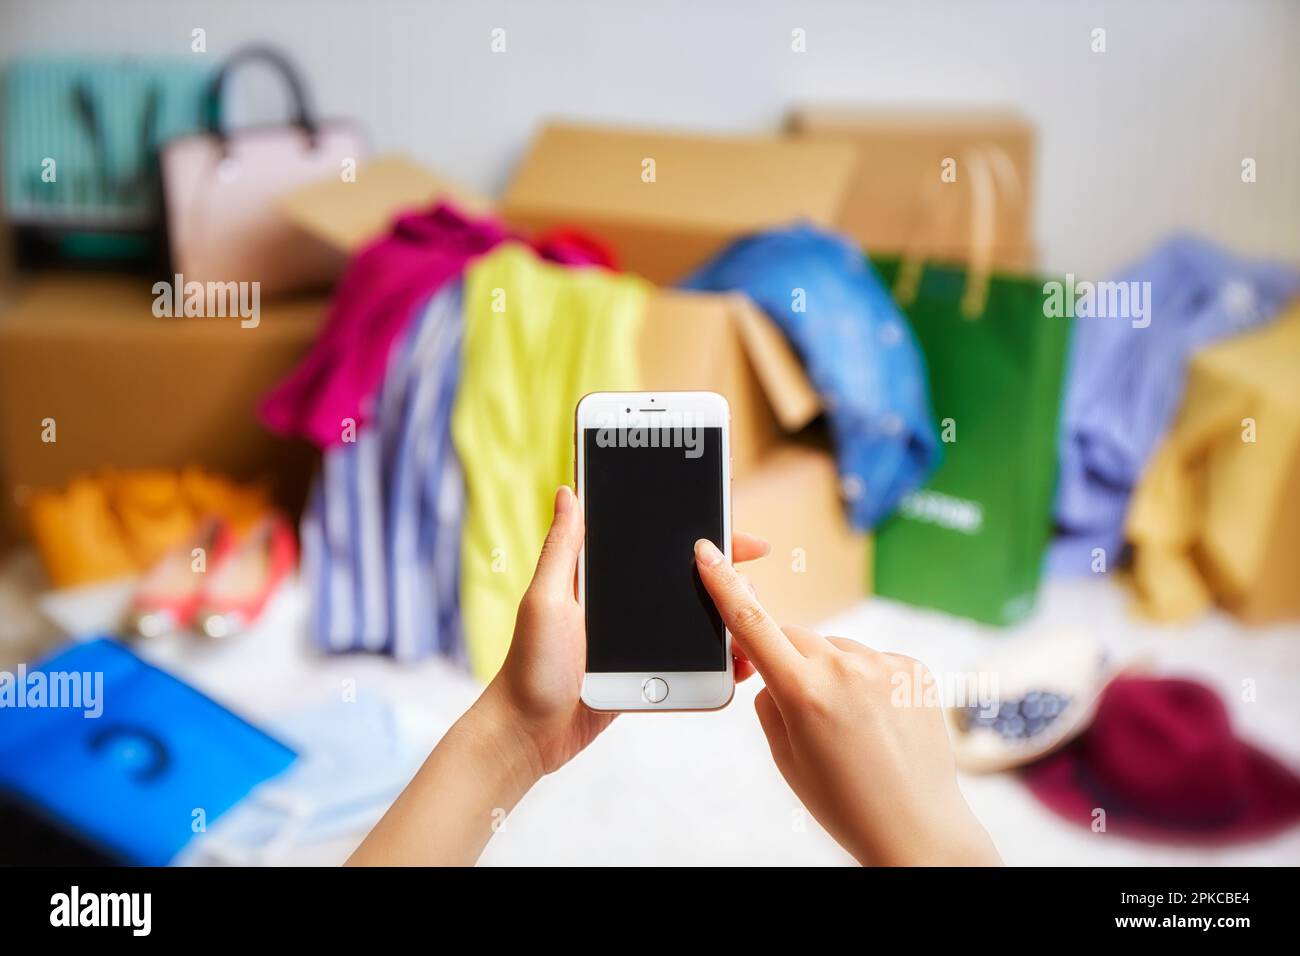 Room cluttered with clothes, hats, etc. coming out of boxes and smart phones Stock Photo